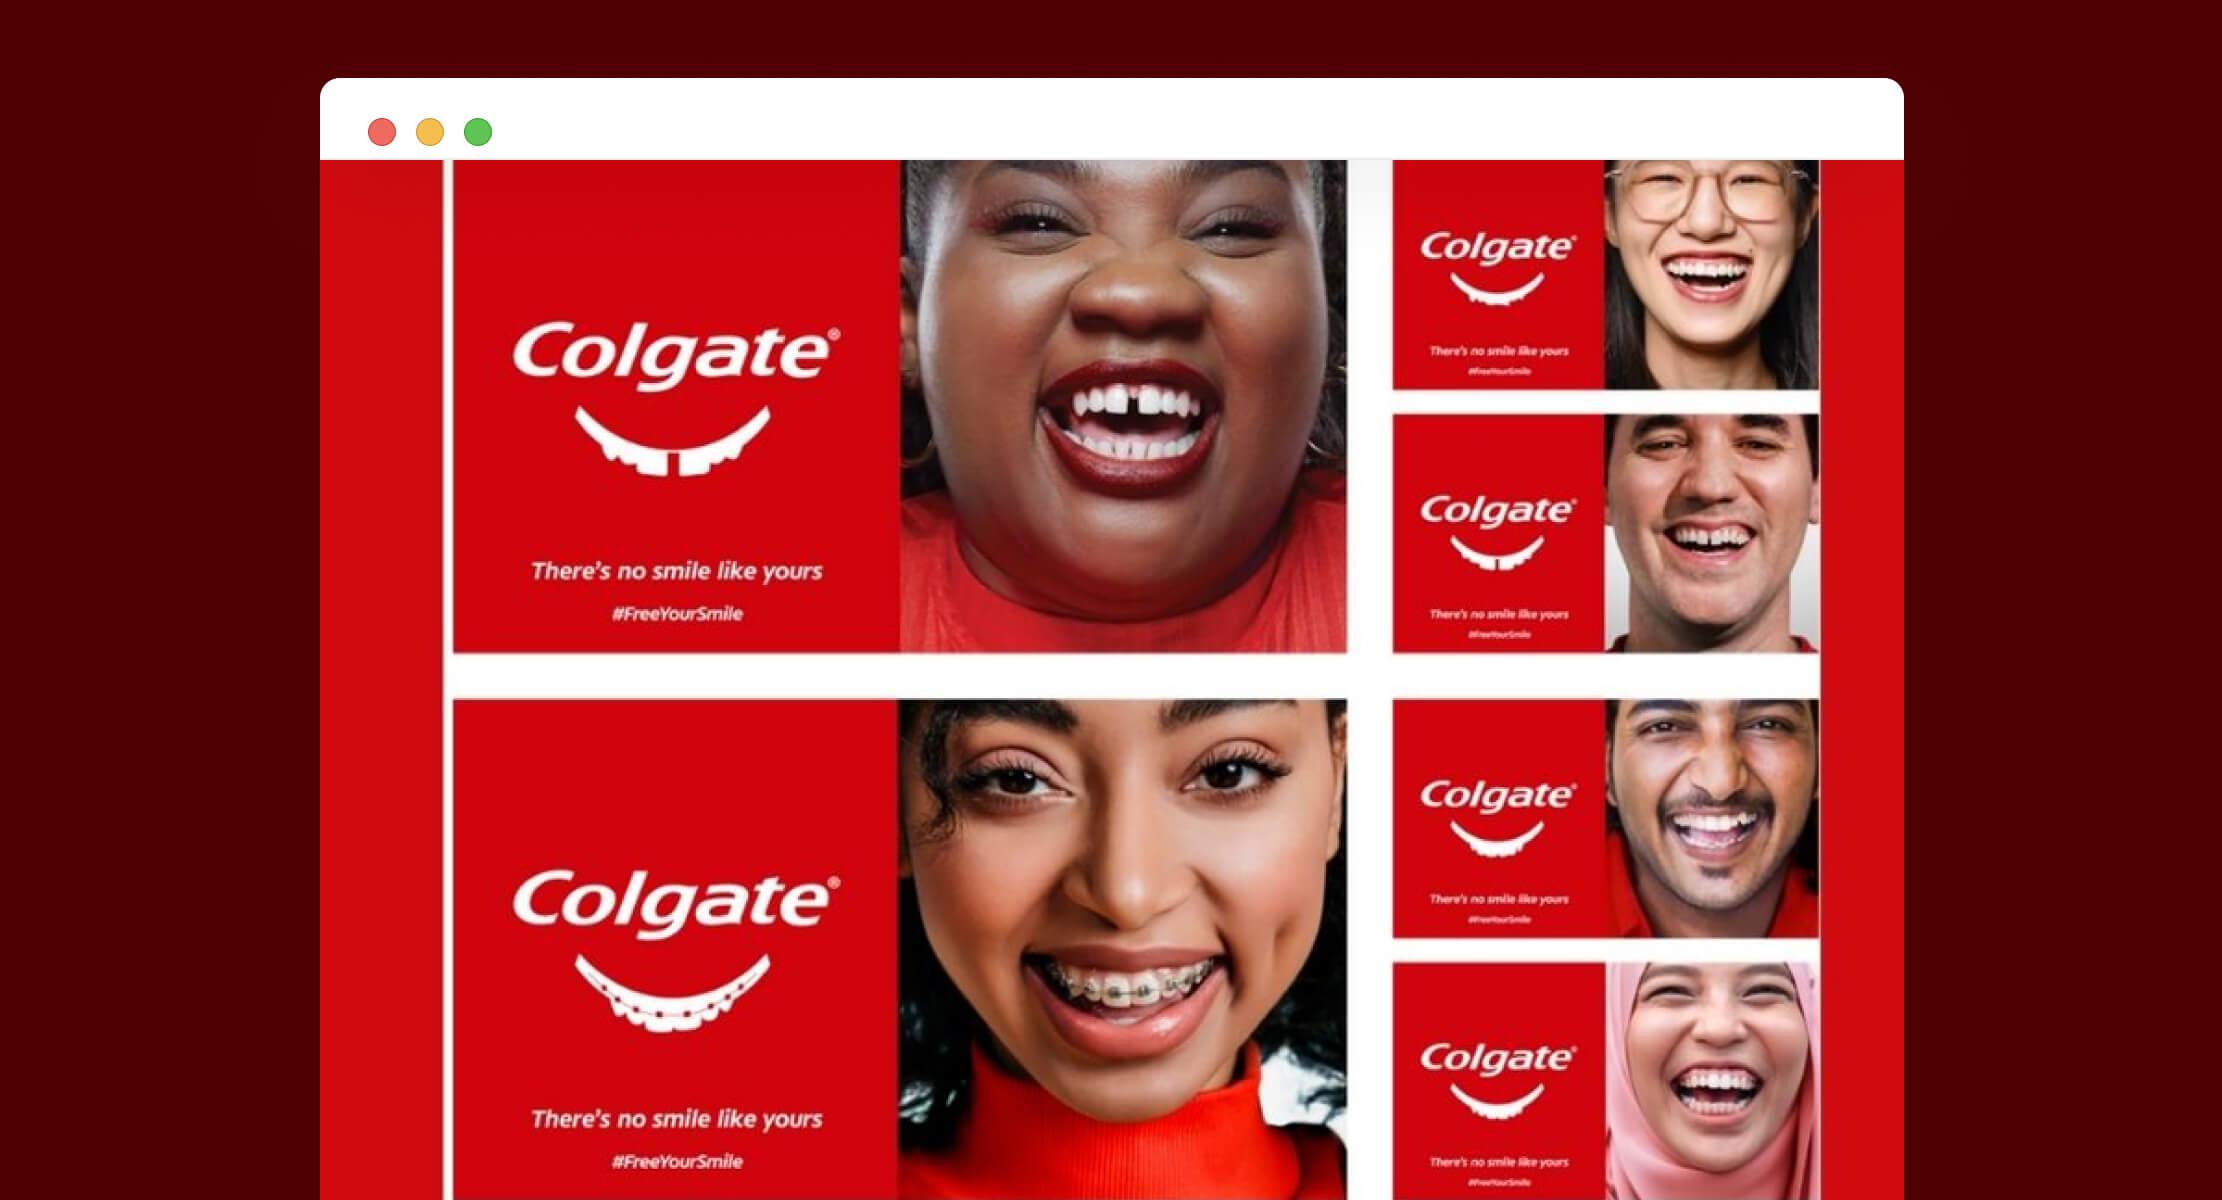 Celebrating the beauty in diversity with Colgate’s 2018 "Embrace Your Unique Smile" campaign. 